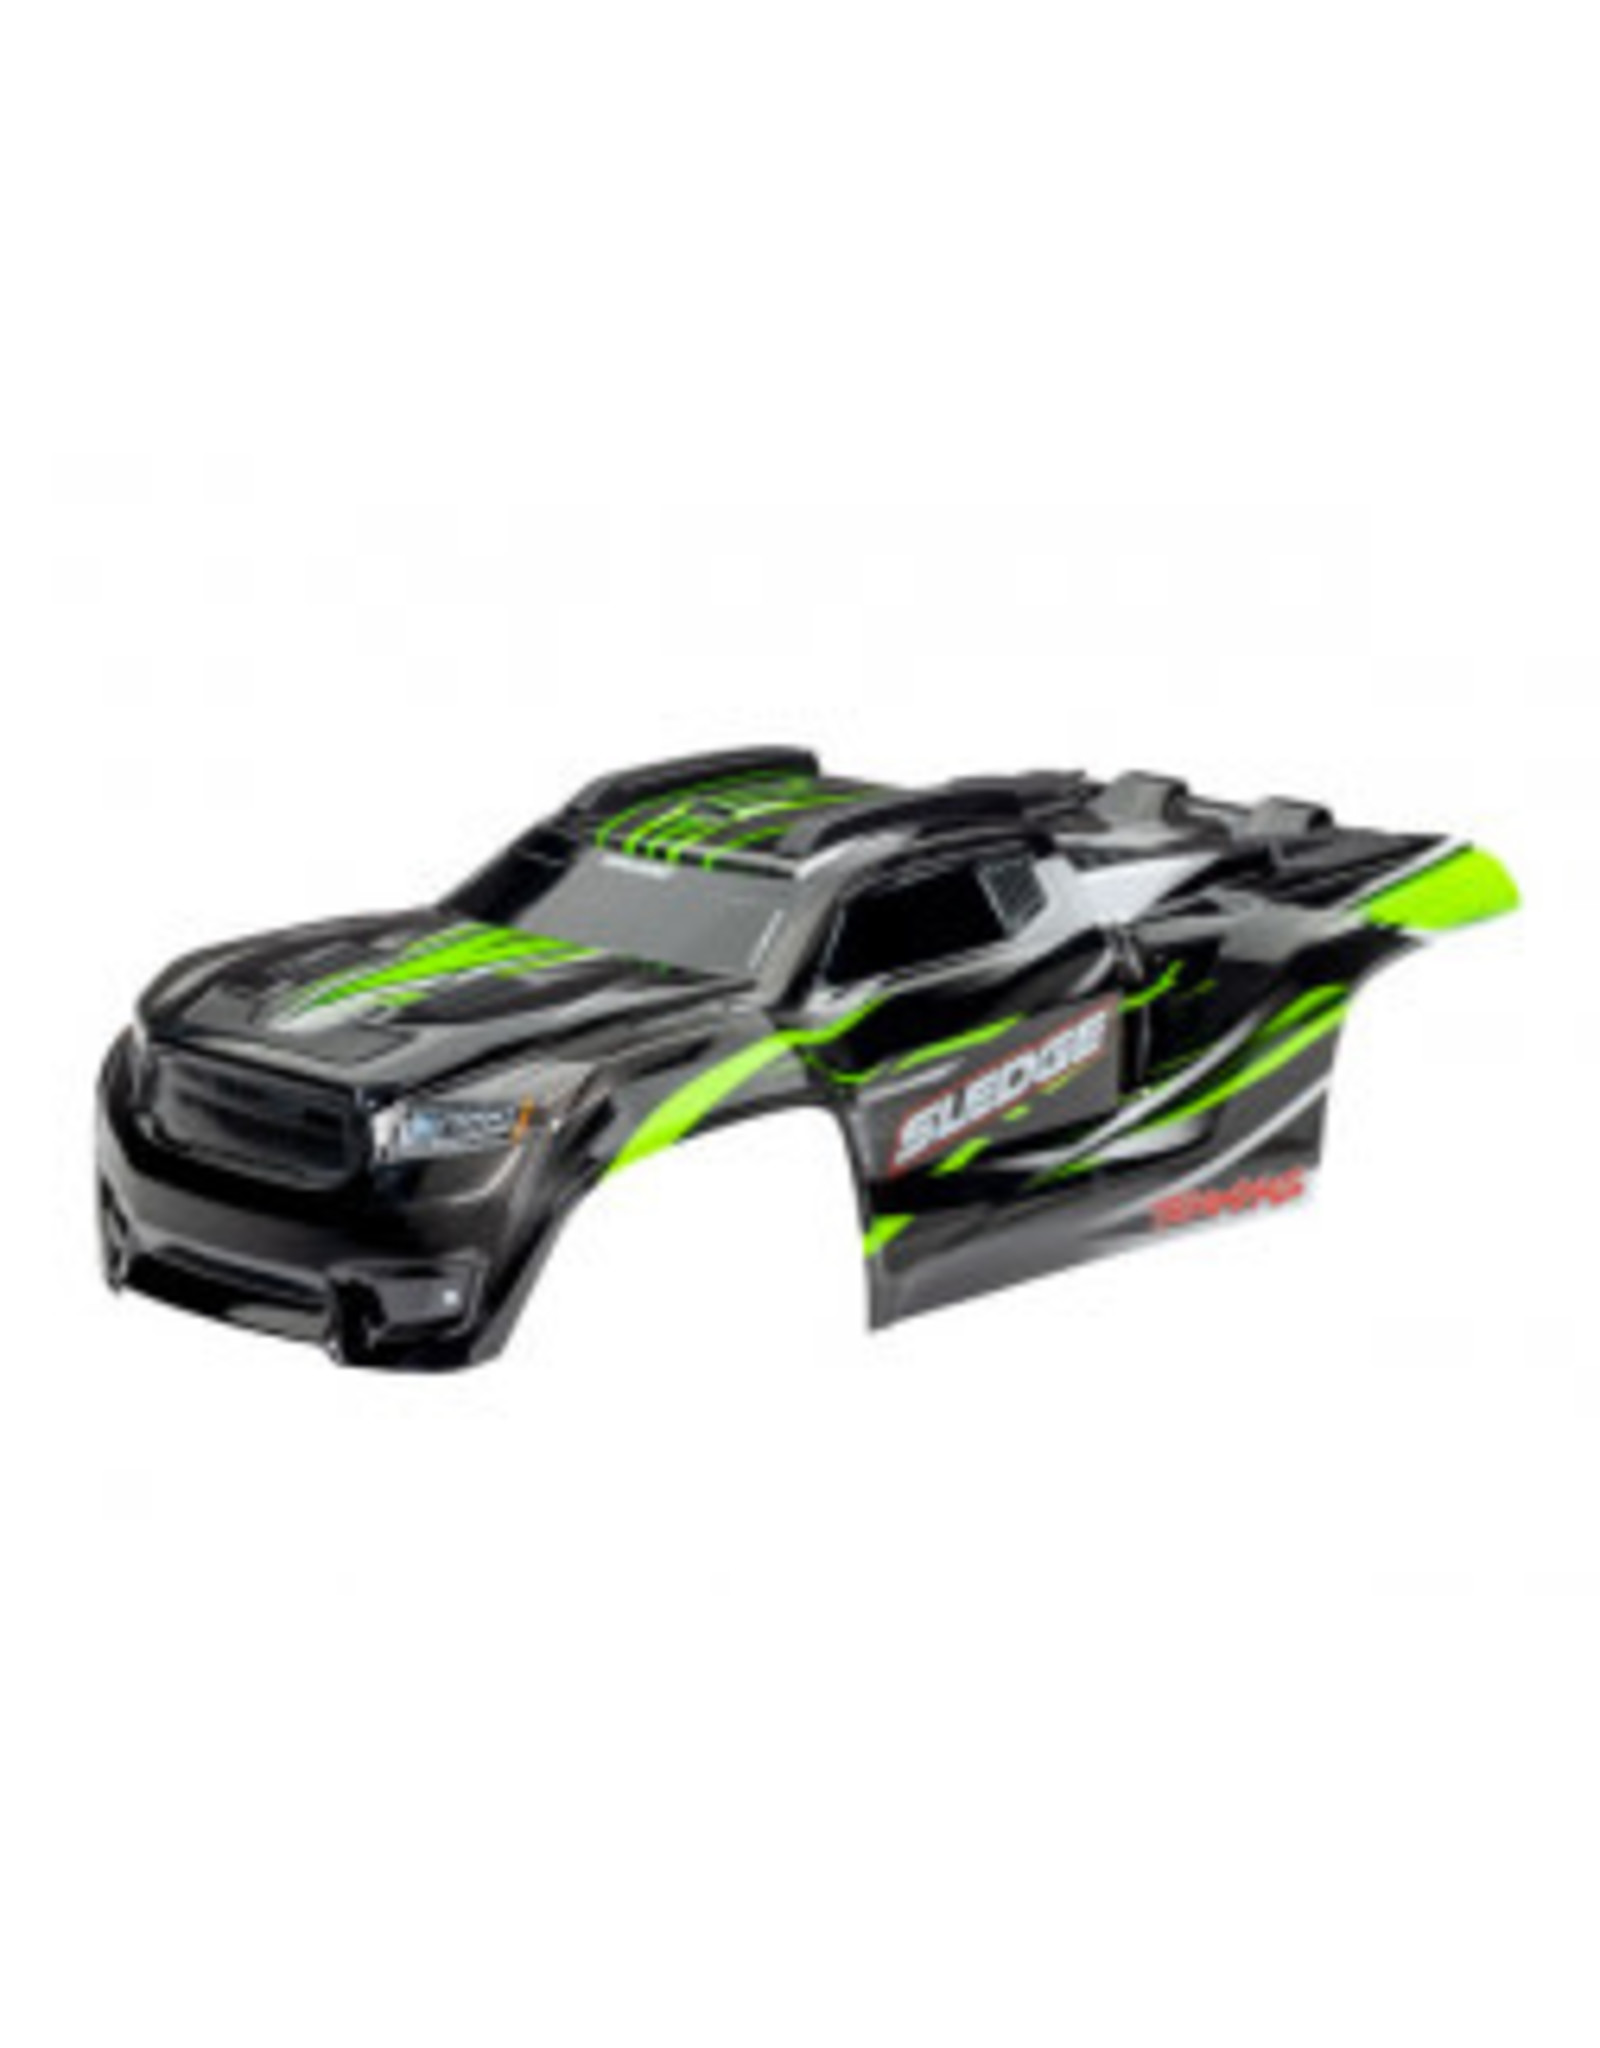 Traxxas Body, Sledge™, green/ window, grille, lights decal sheet (assembled with front & rear body mounts and rear body support for clipless mounting)